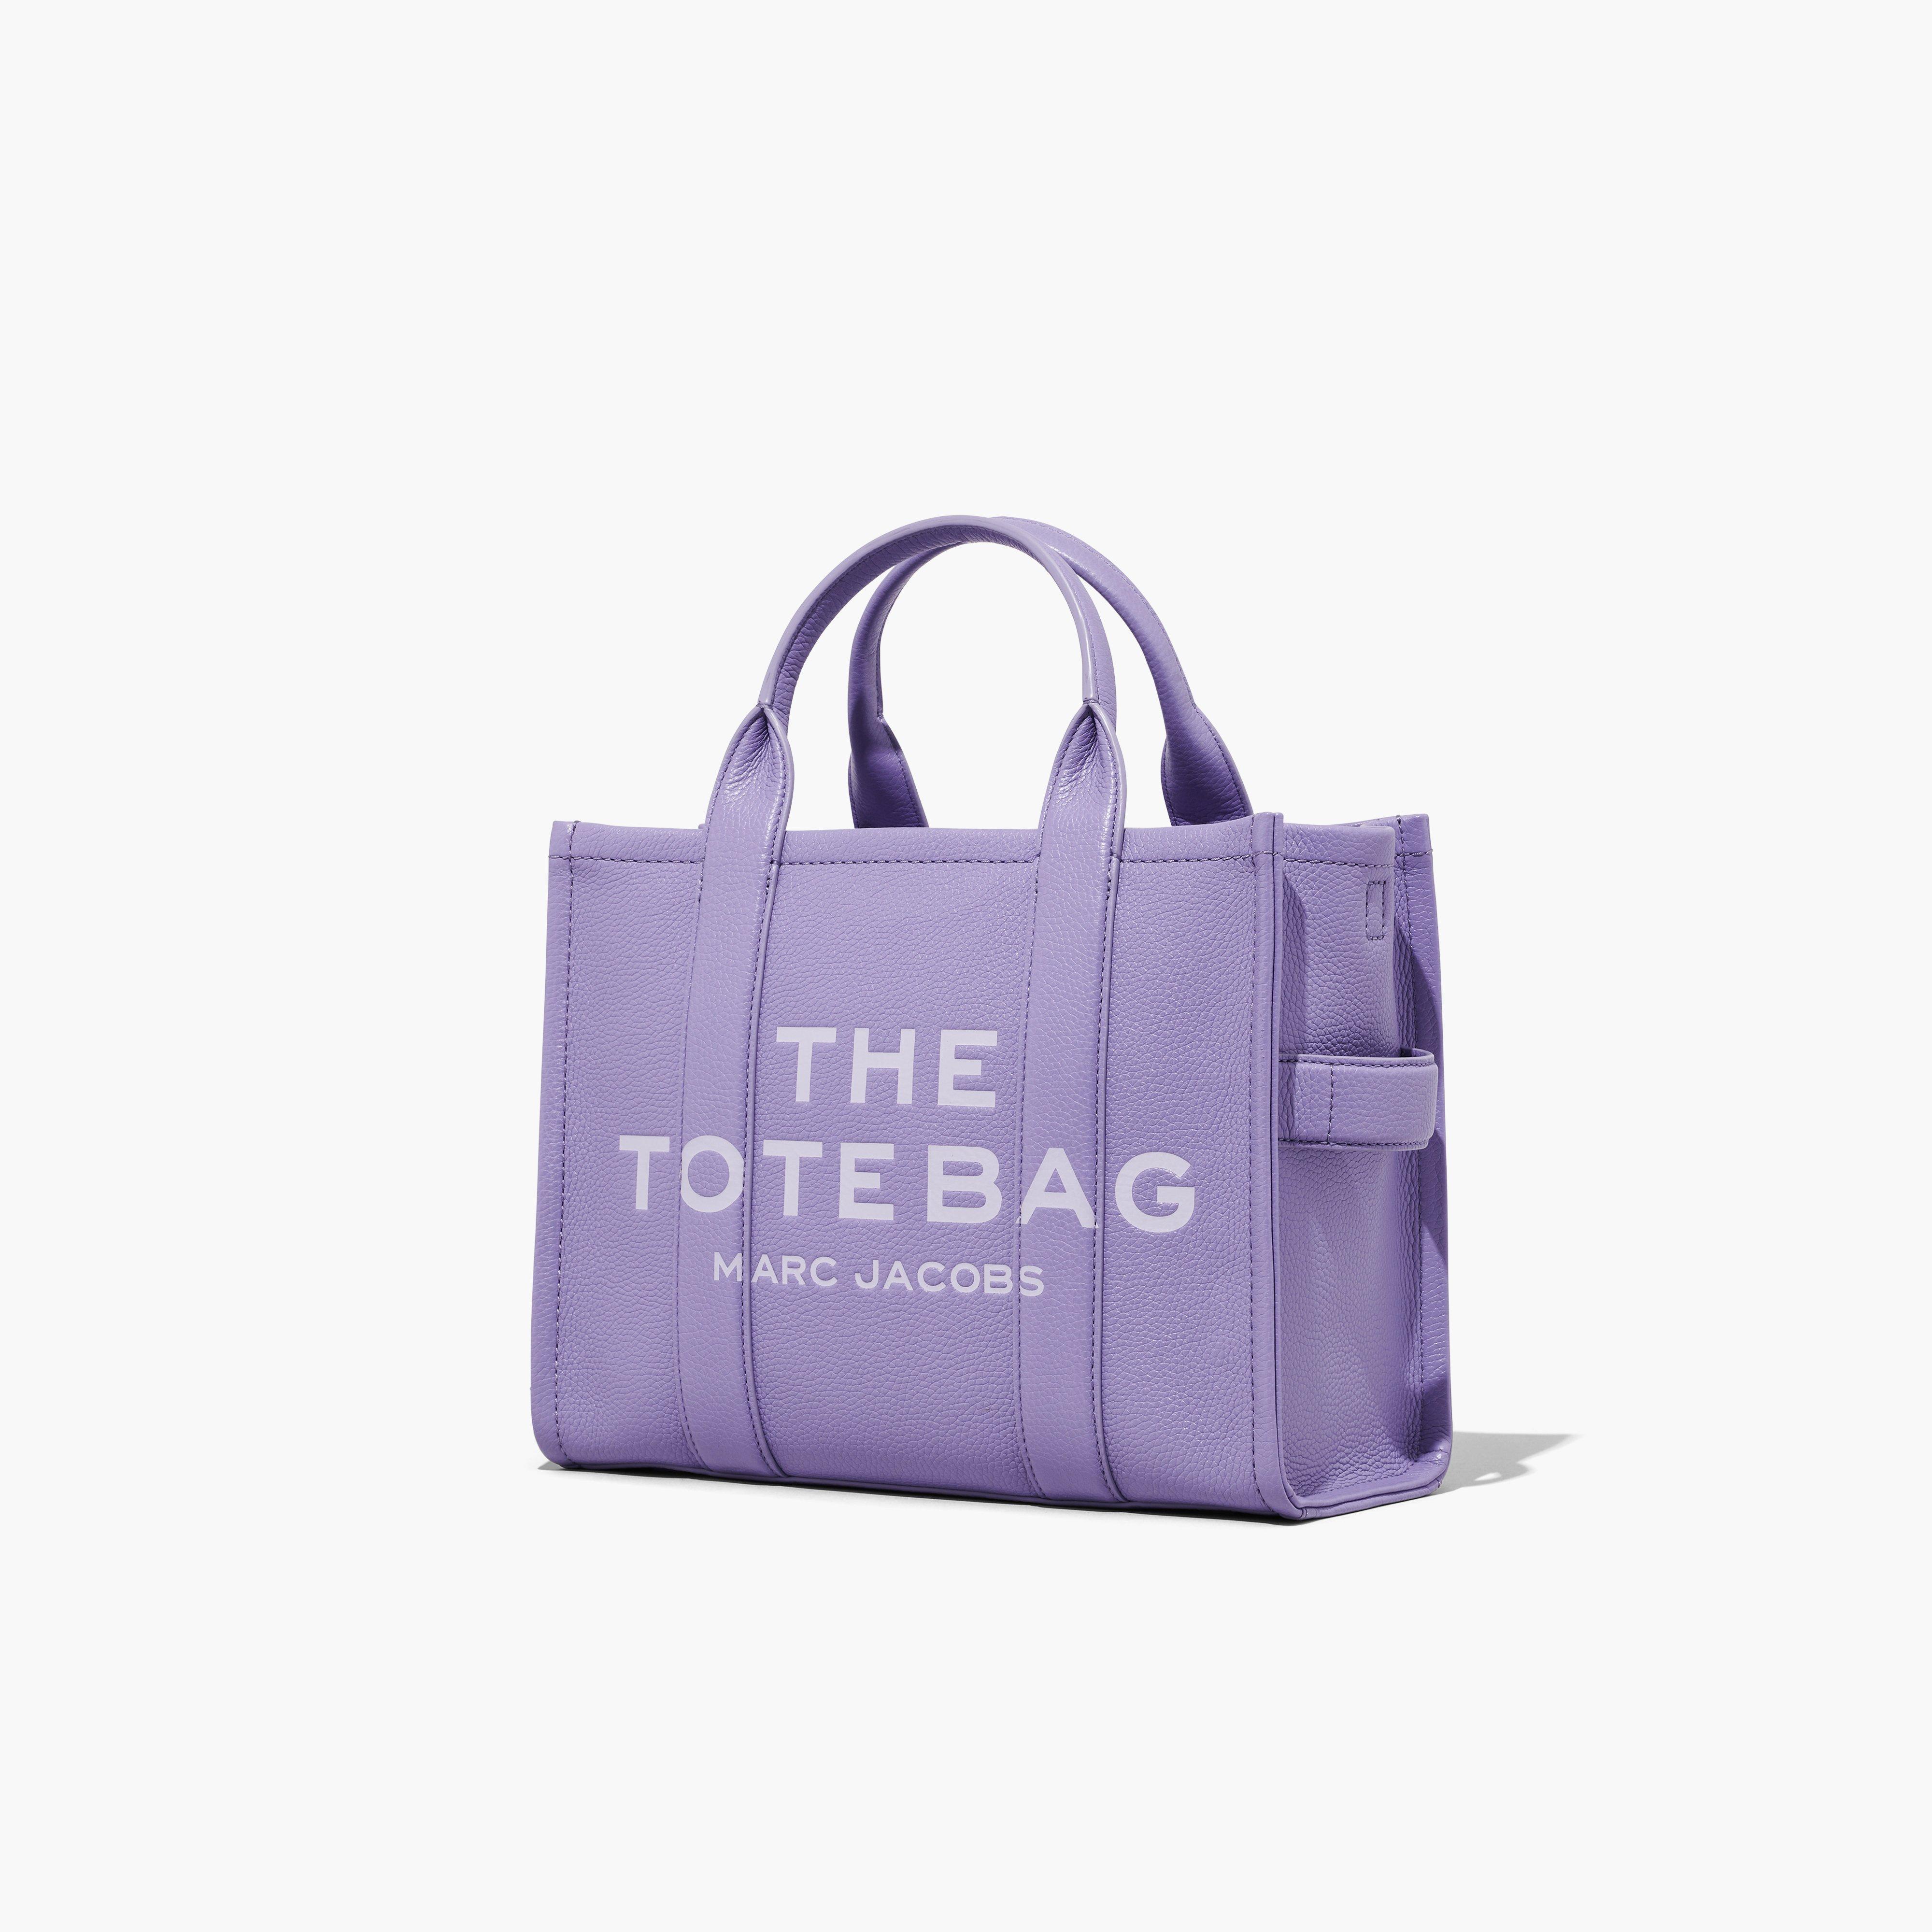 Marc Jacobs The Leather Medium Tote Bag in Purple | Lyst